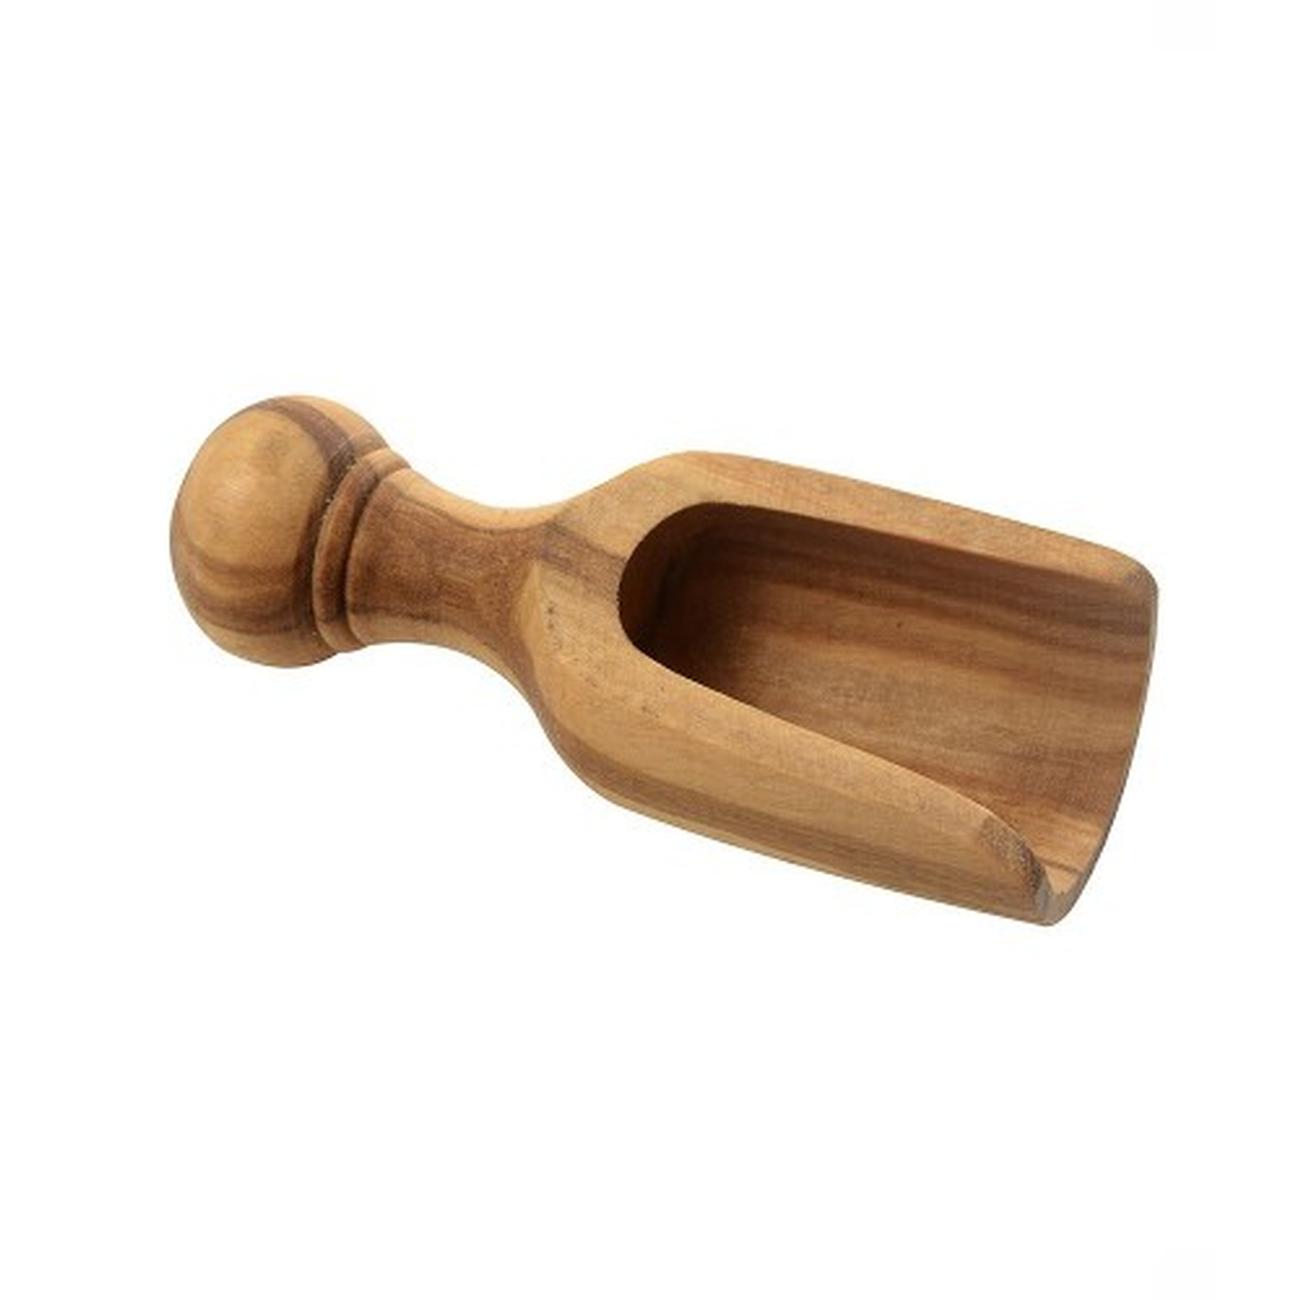 Olive Wood Mini Scoop  Scoop for Salts, Herbs, and More!